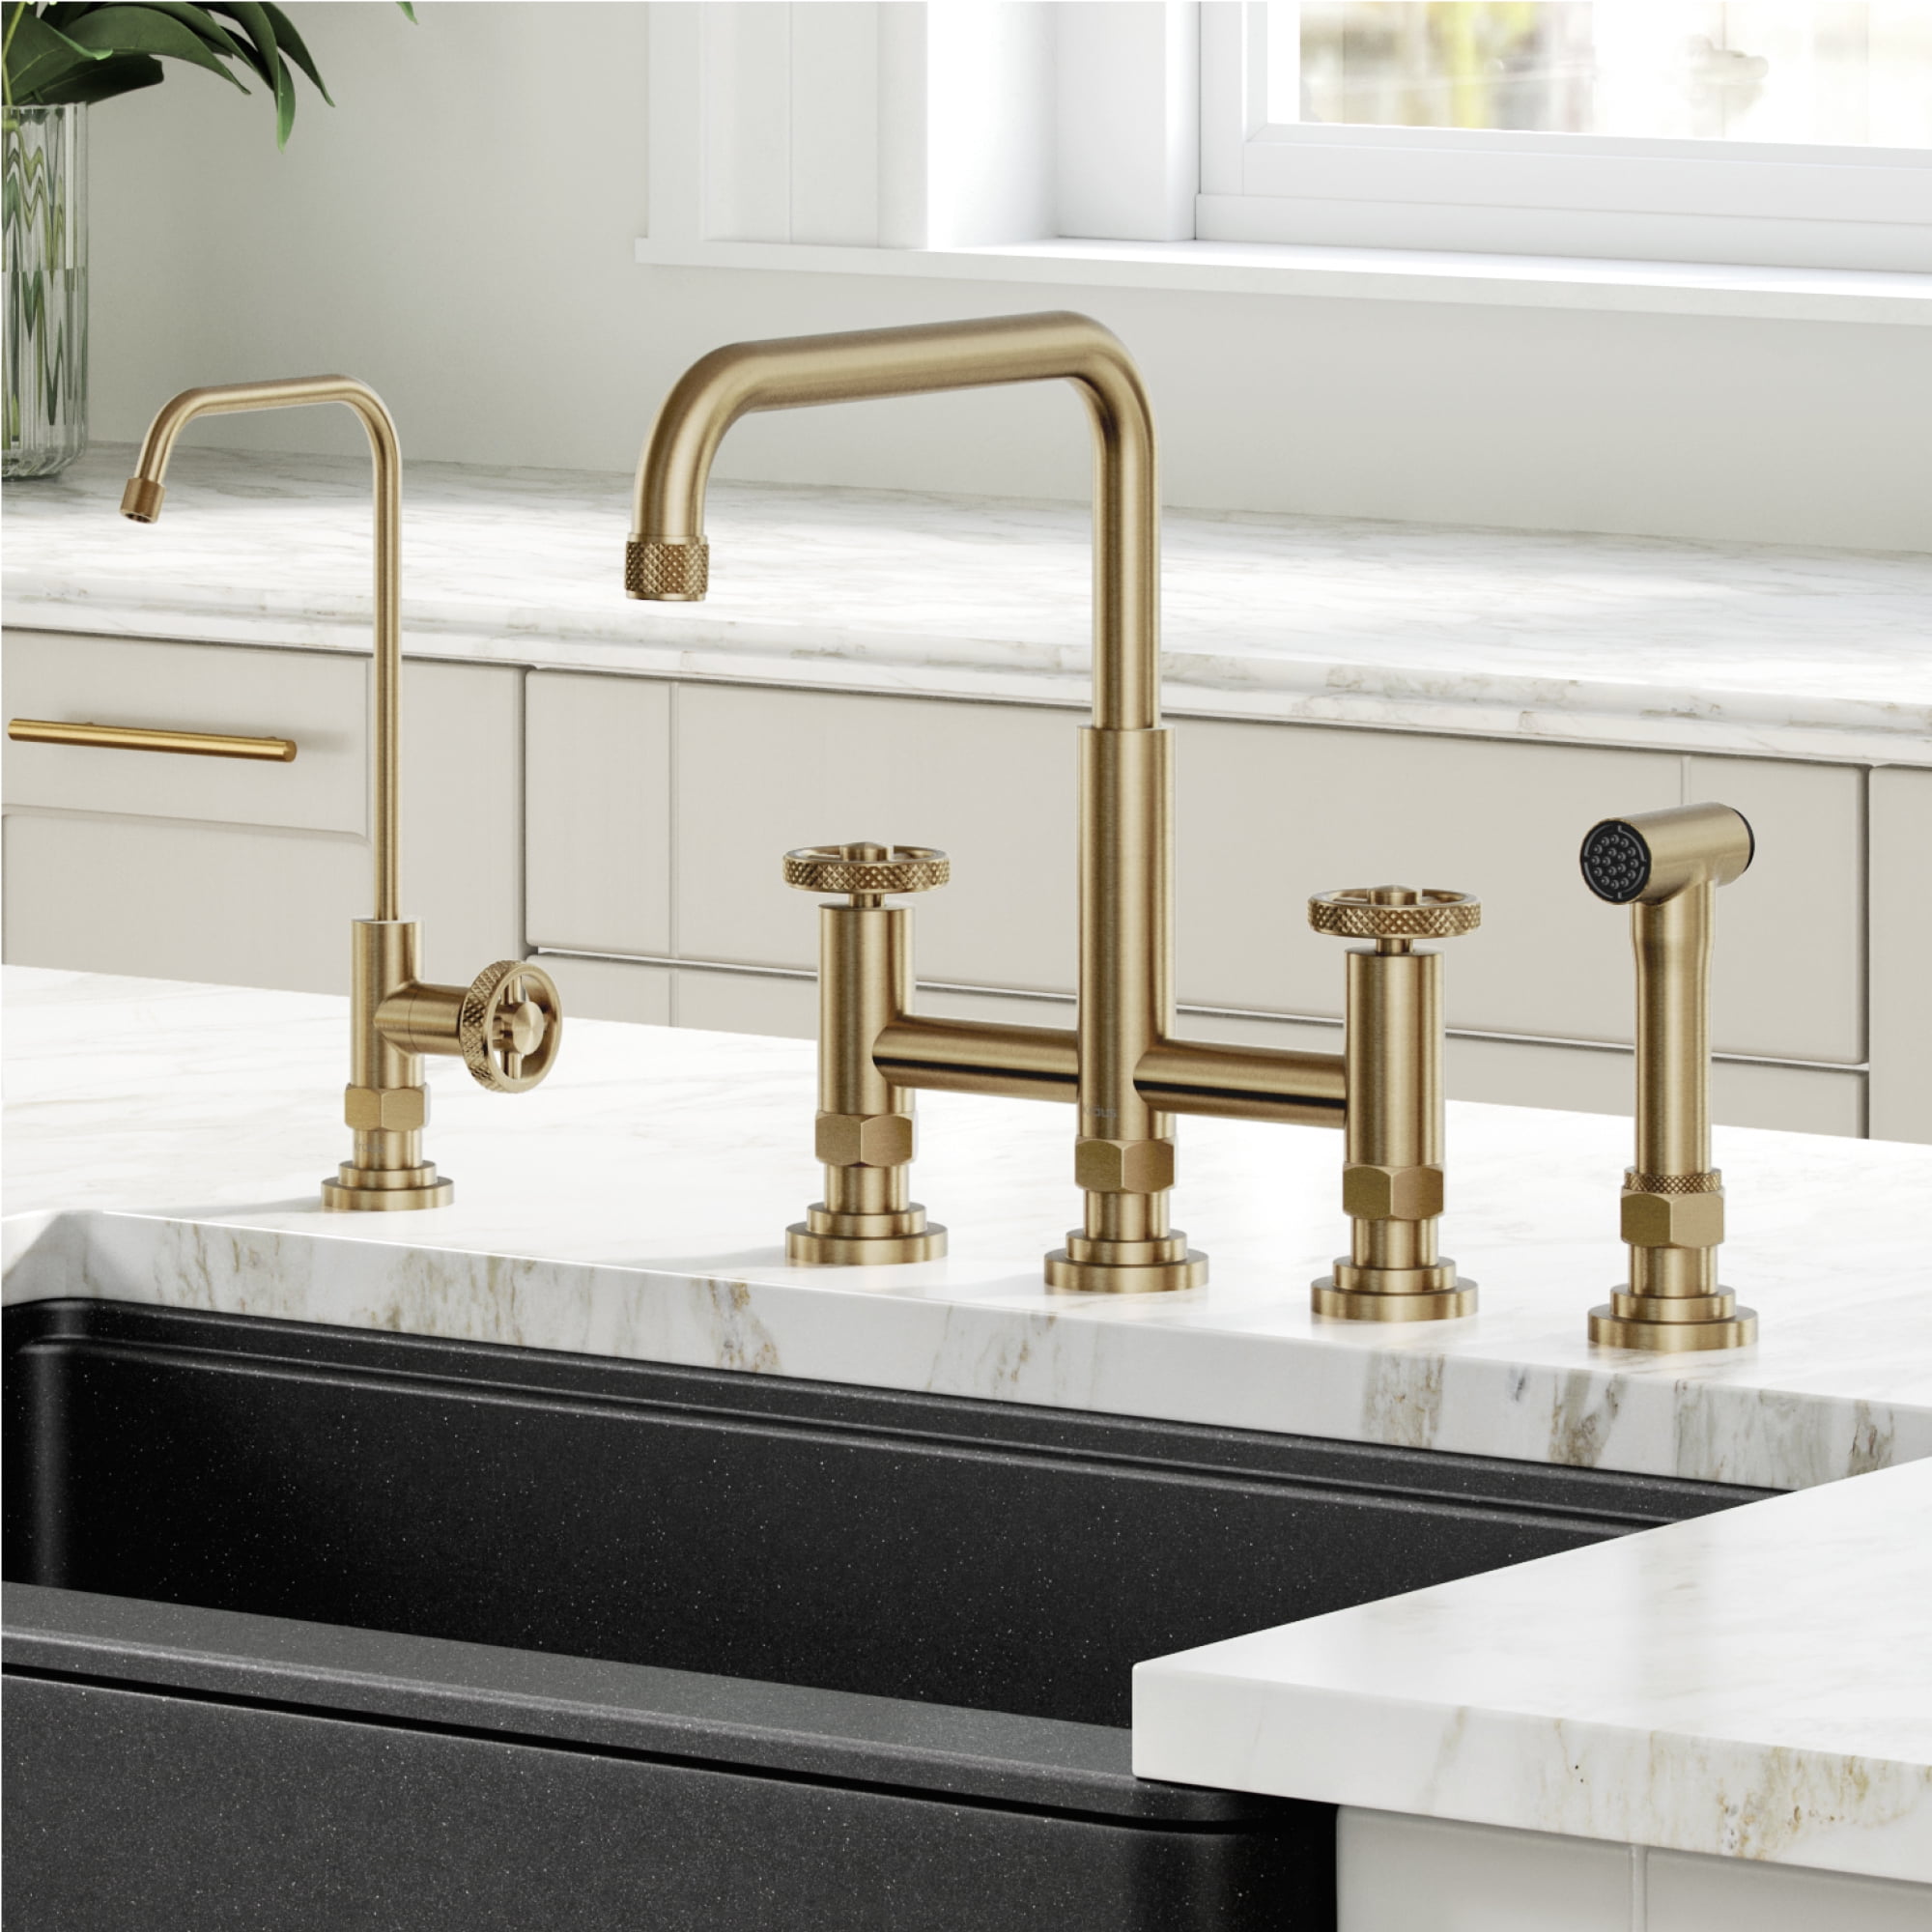 LAZADA Modern Best Lead Free Solid Brass Kitchen Bar Sink Drinking Water Faucet Water Filtration Faucet Oil Rubbed Bronze 